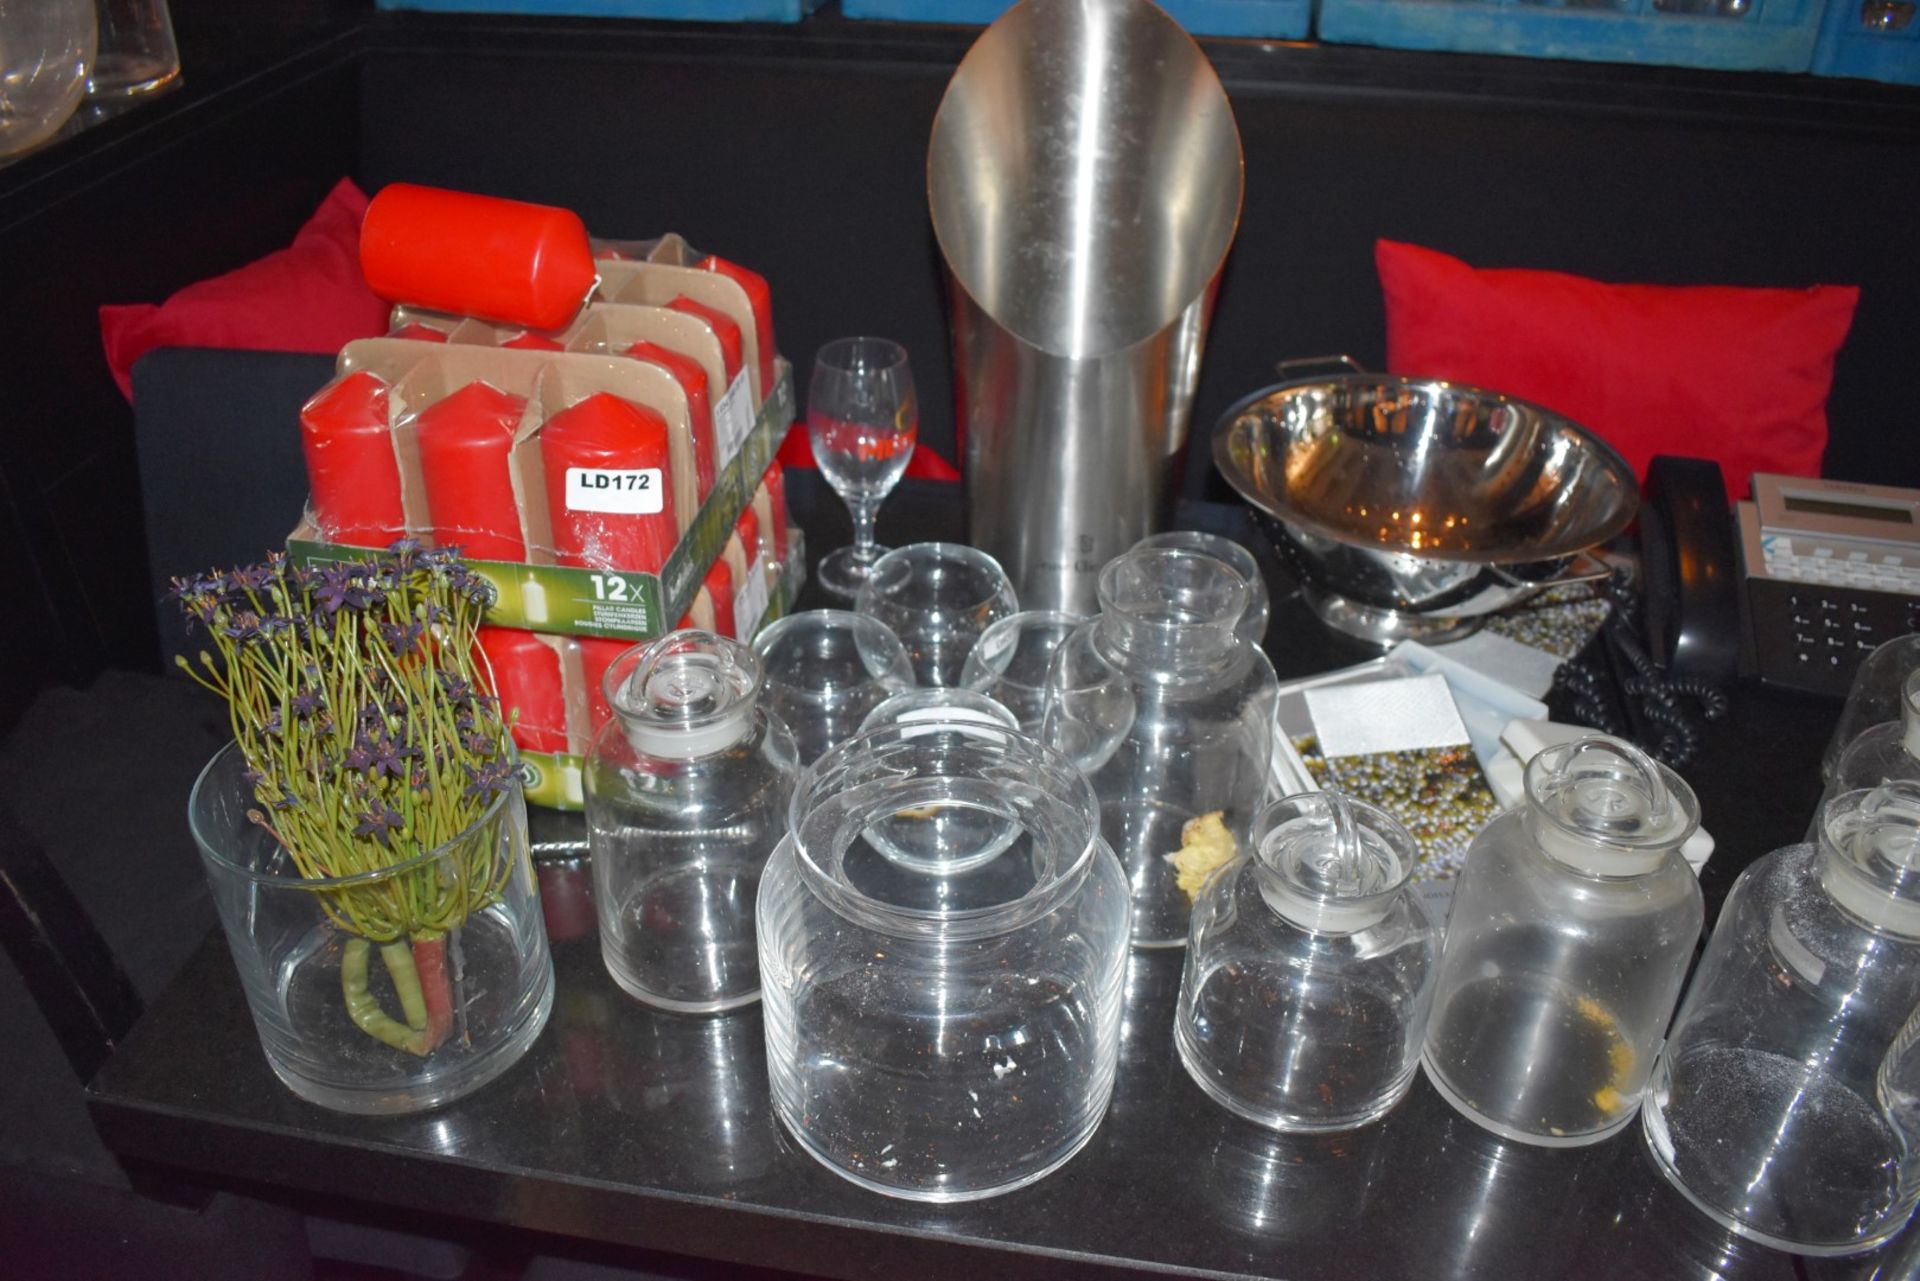 Approx 80 x Assorted Items of Various Kitchenware - Includes Pans, Utensils, Candles, Colanders, - Image 15 of 21